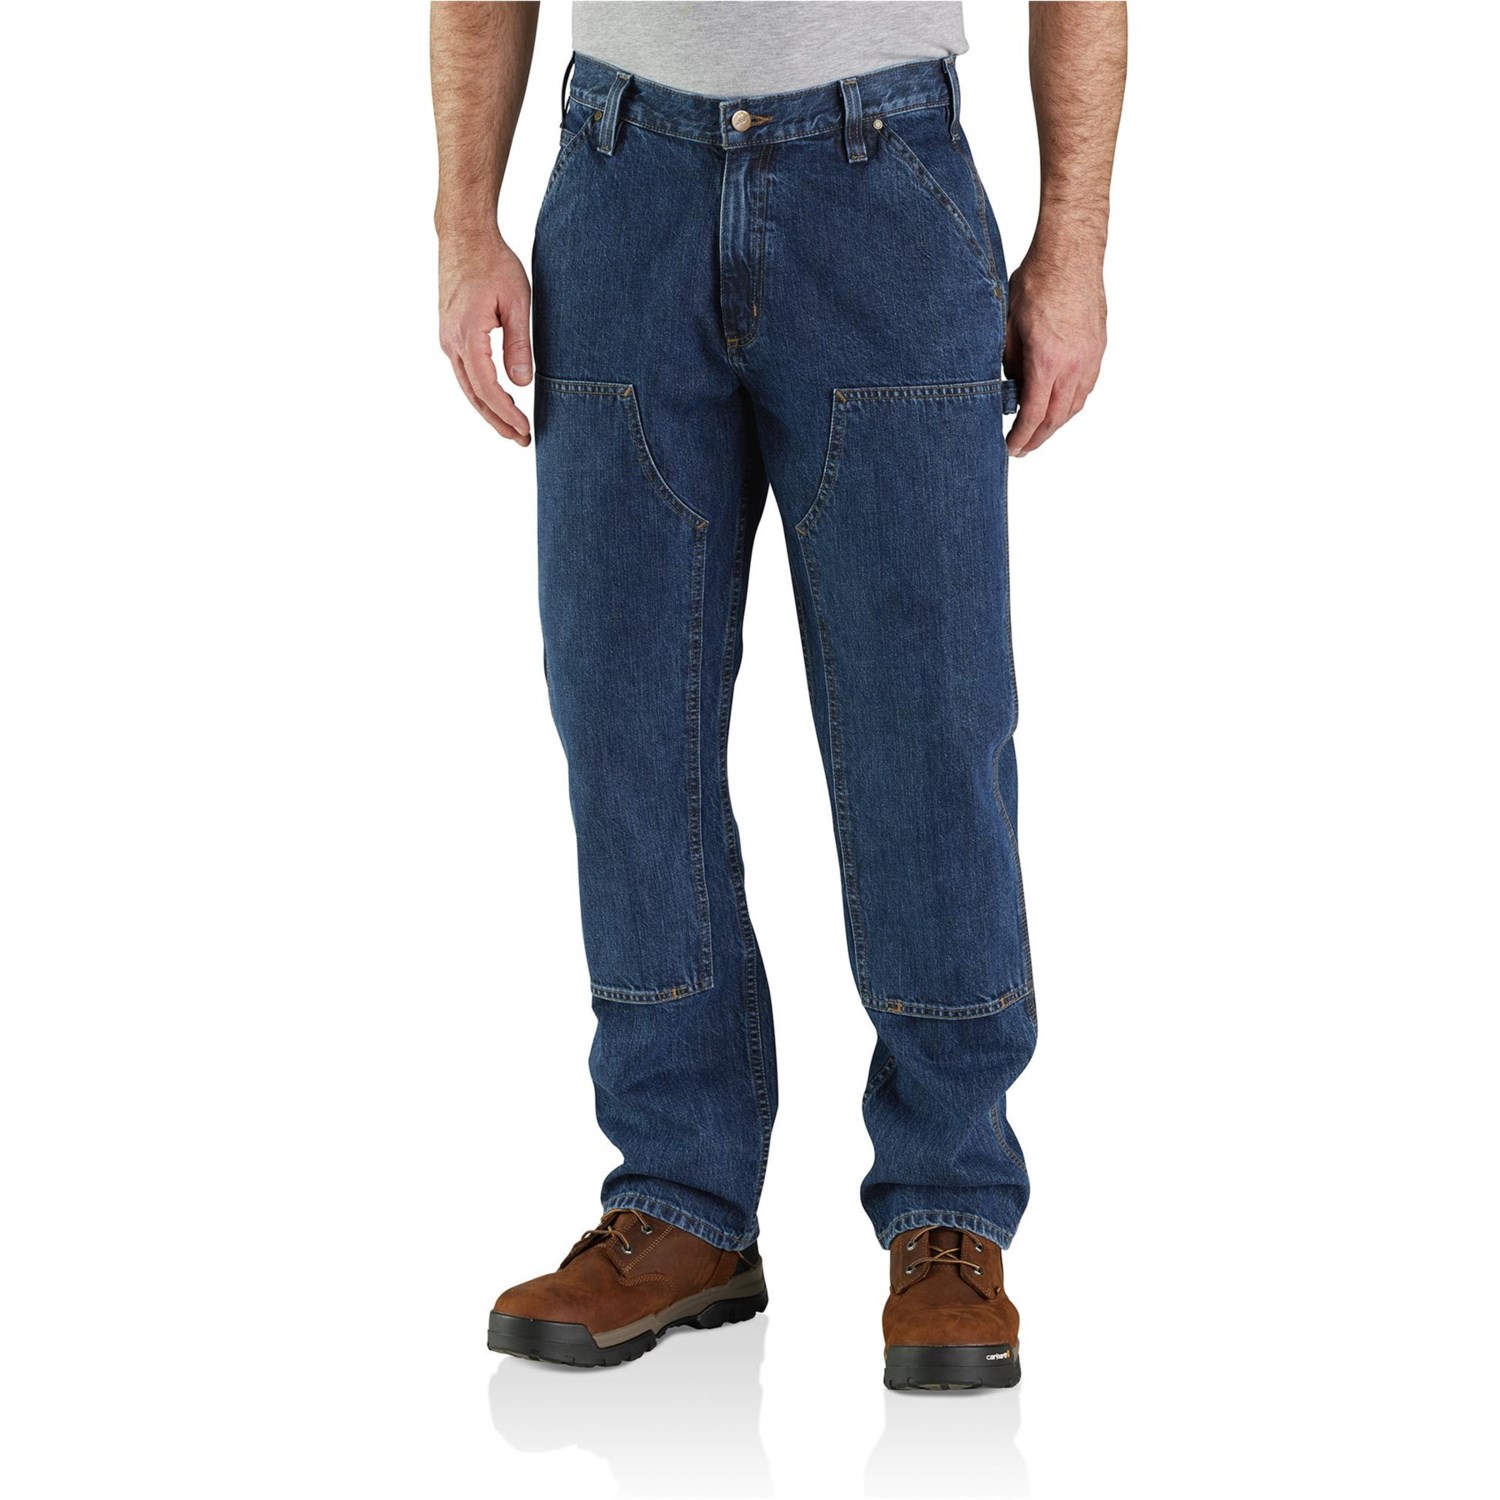 Carhartt 104944 Loose Fit Double-Front Utility Logger Jeans - Factory Seconds